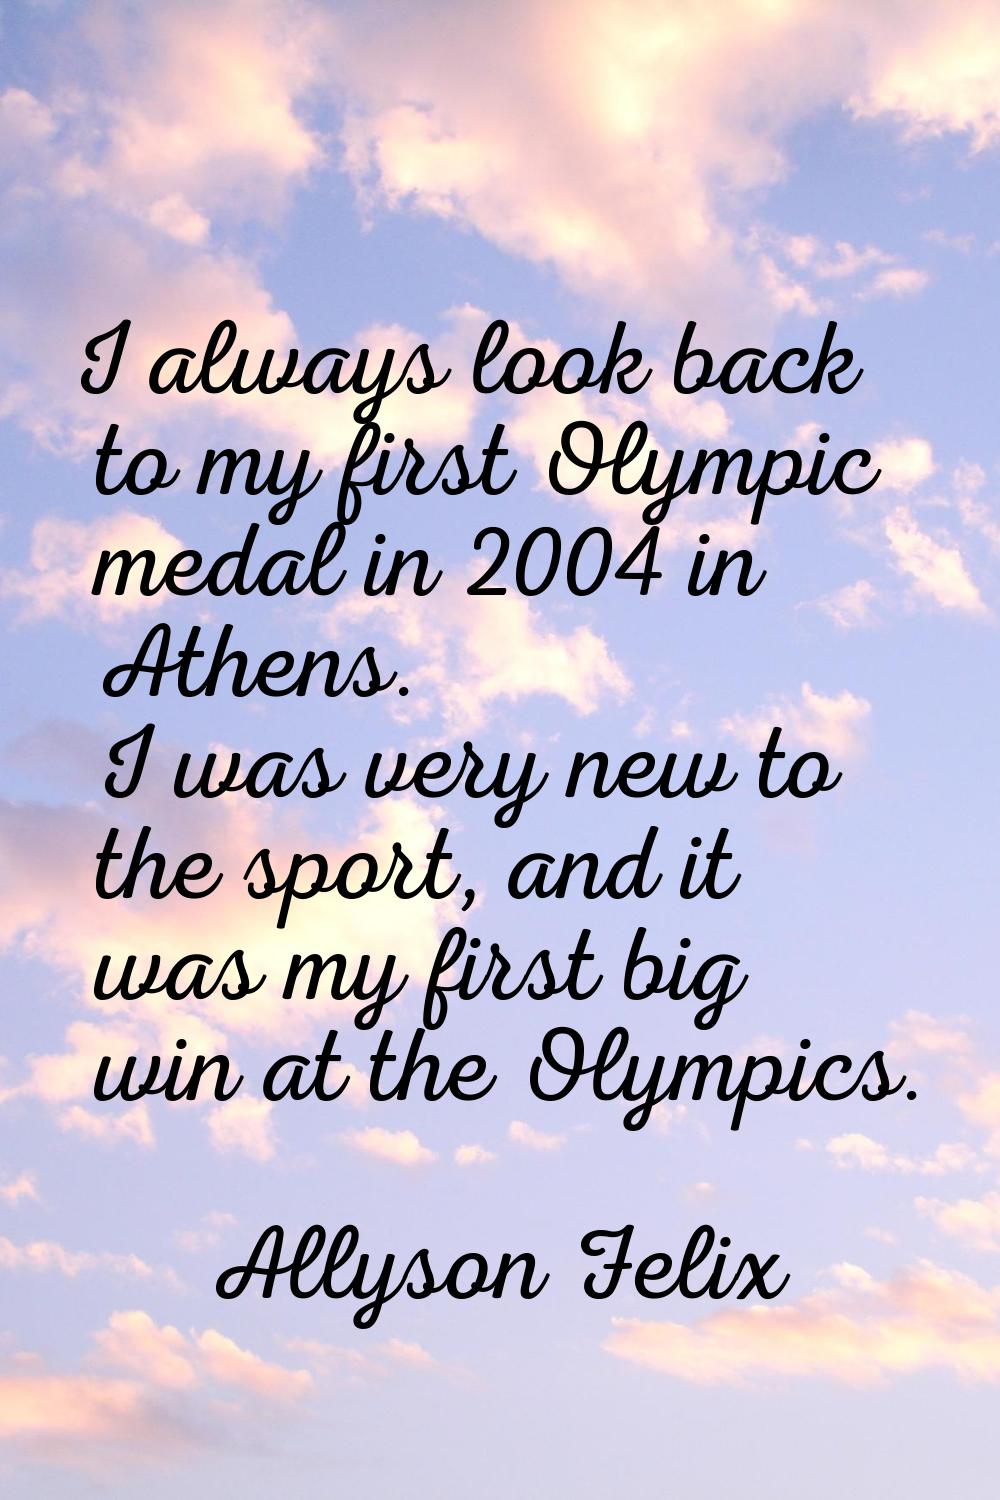 I always look back to my first Olympic medal in 2004 in Athens. I was very new to the sport, and it